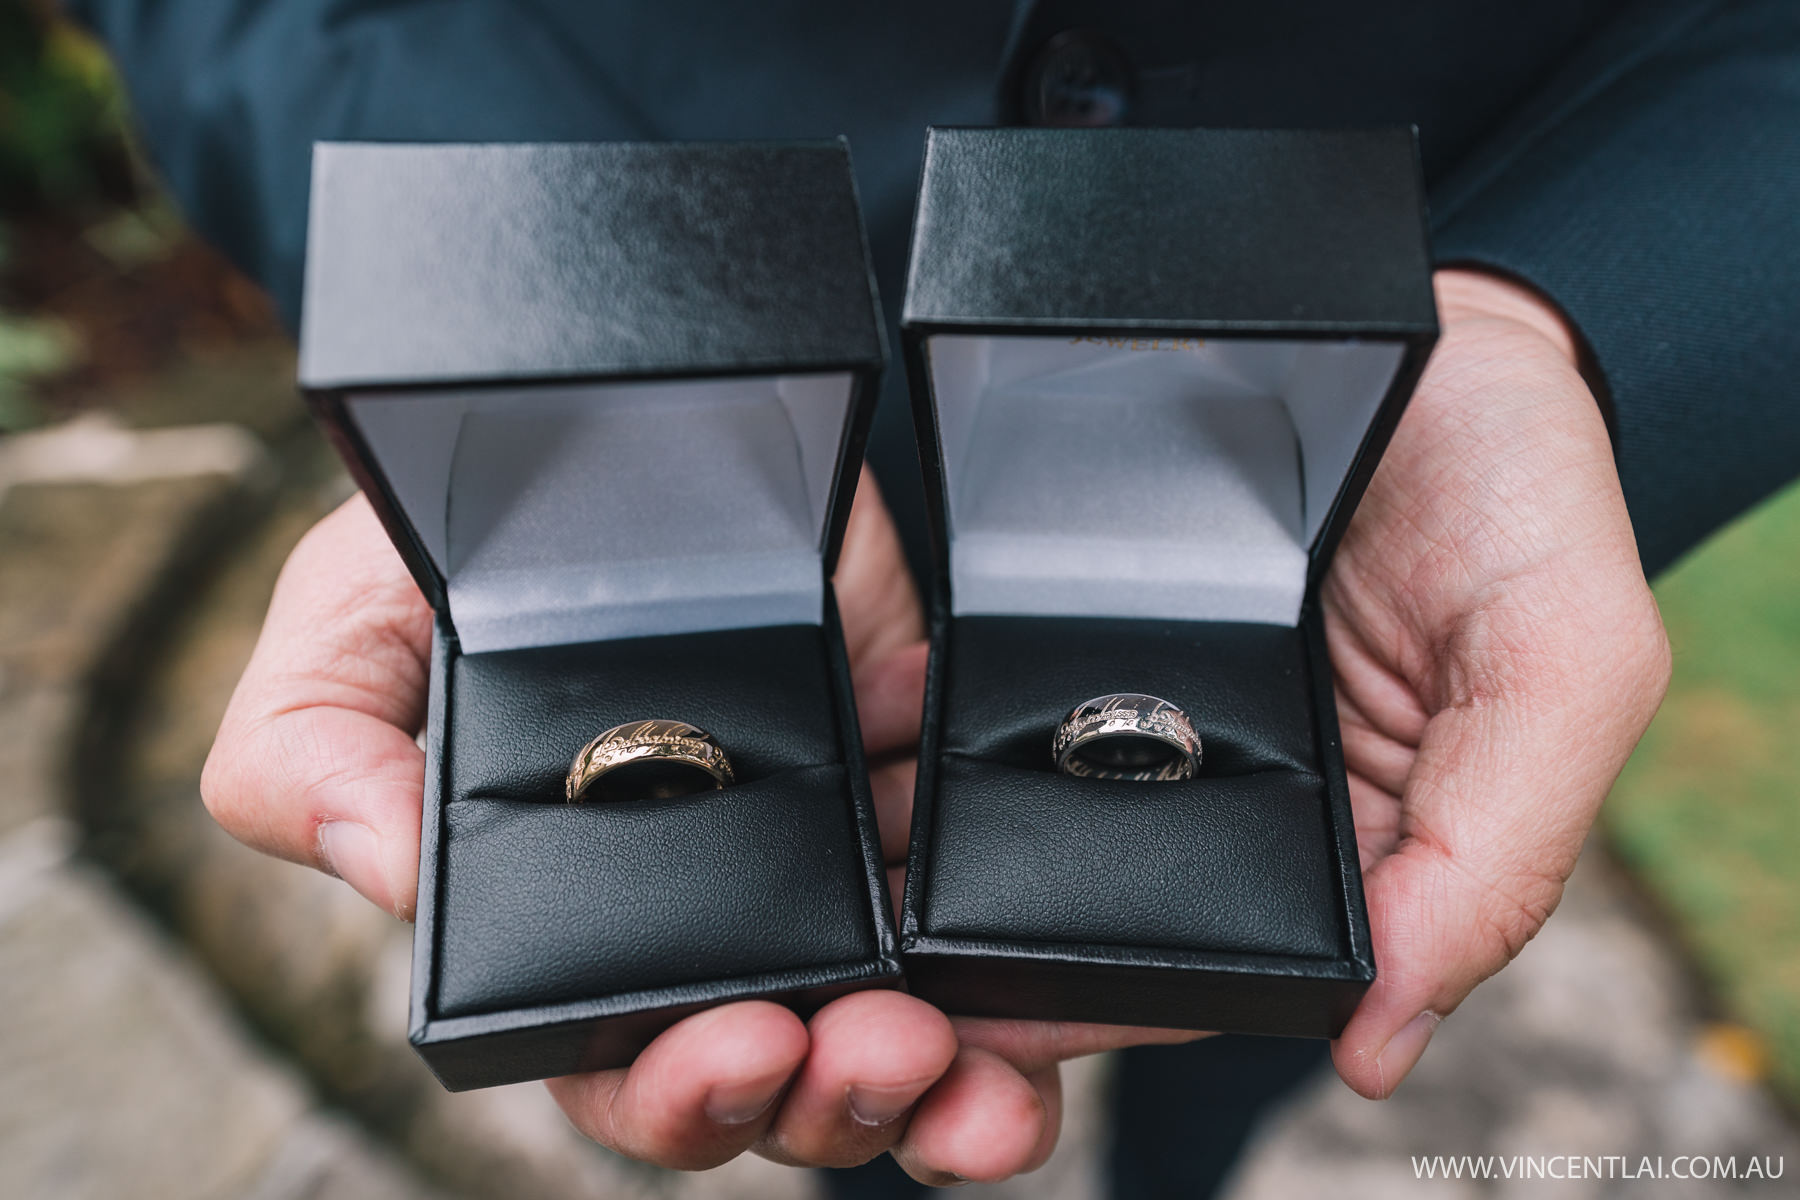 Lord of the Rings Wedding Bands